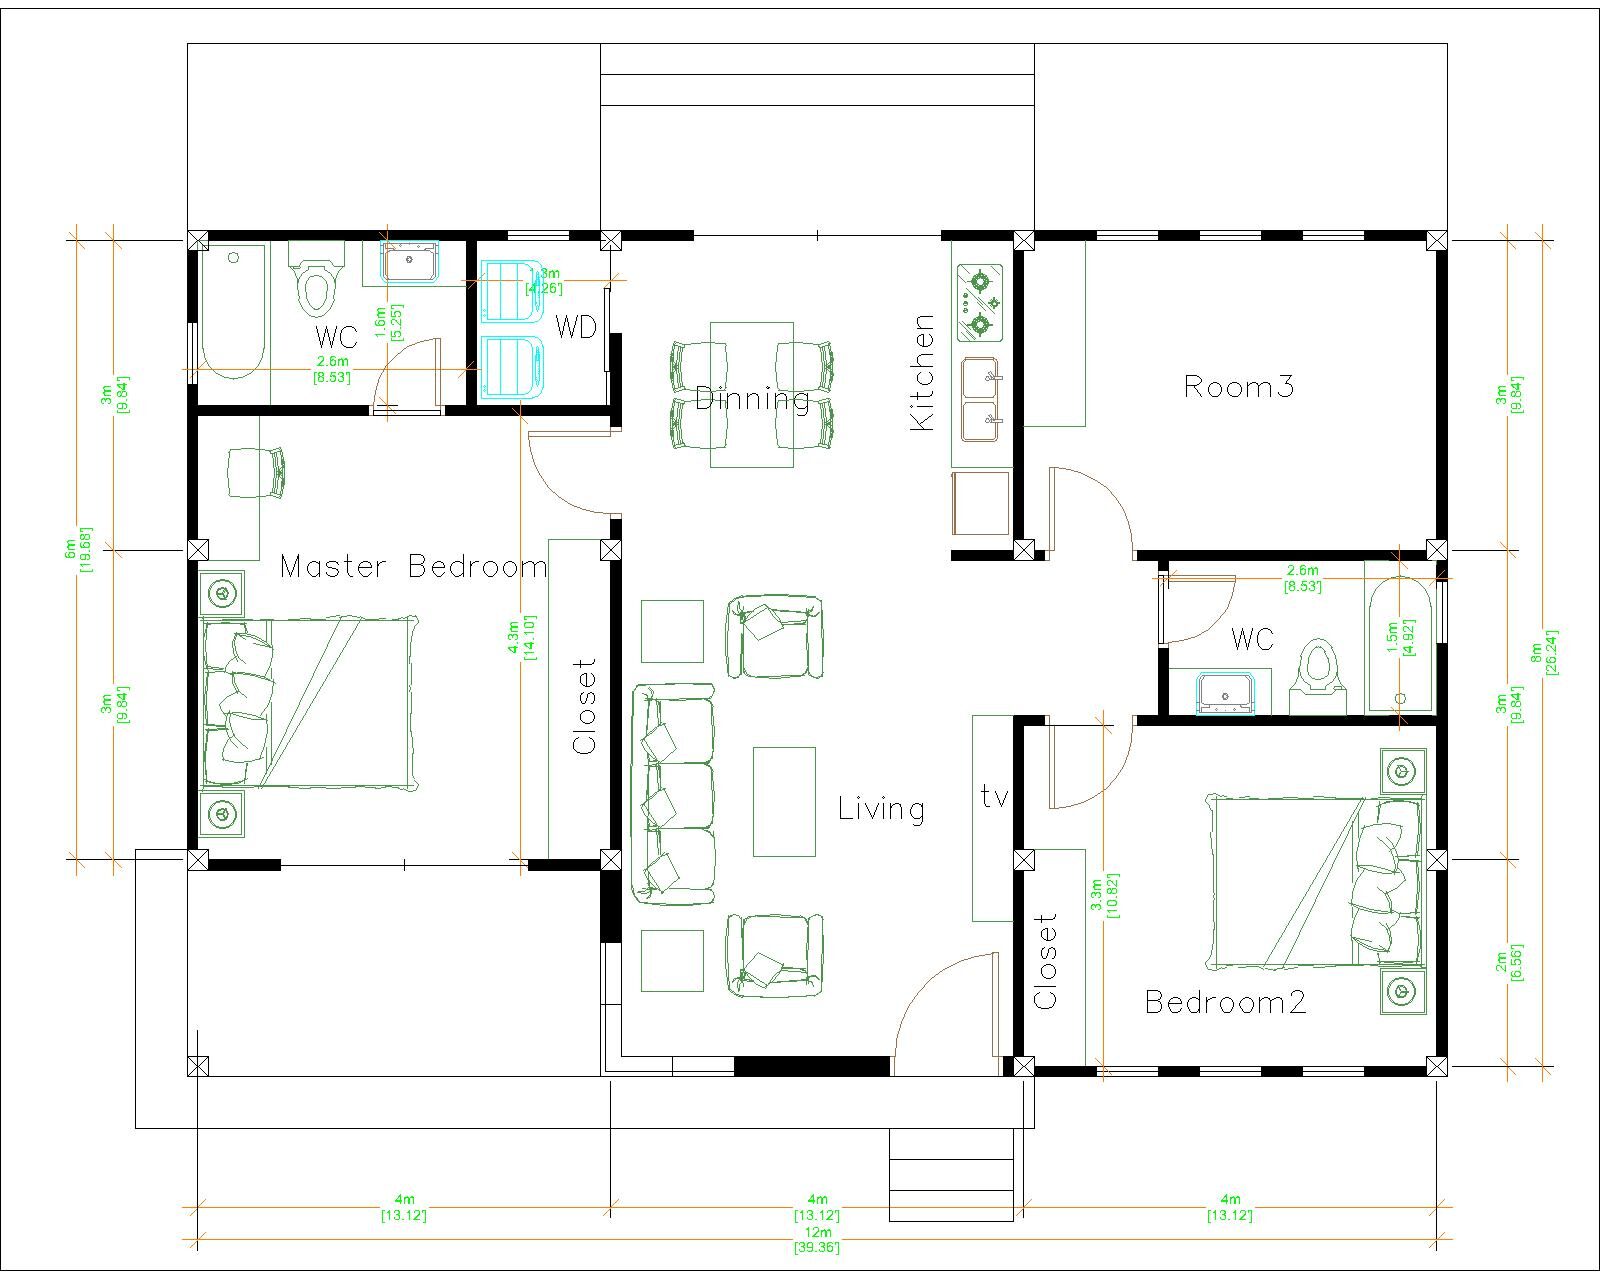 One Level House Plans 12x12 Meters 40x40 Feet 3 Beds Layout floor plan